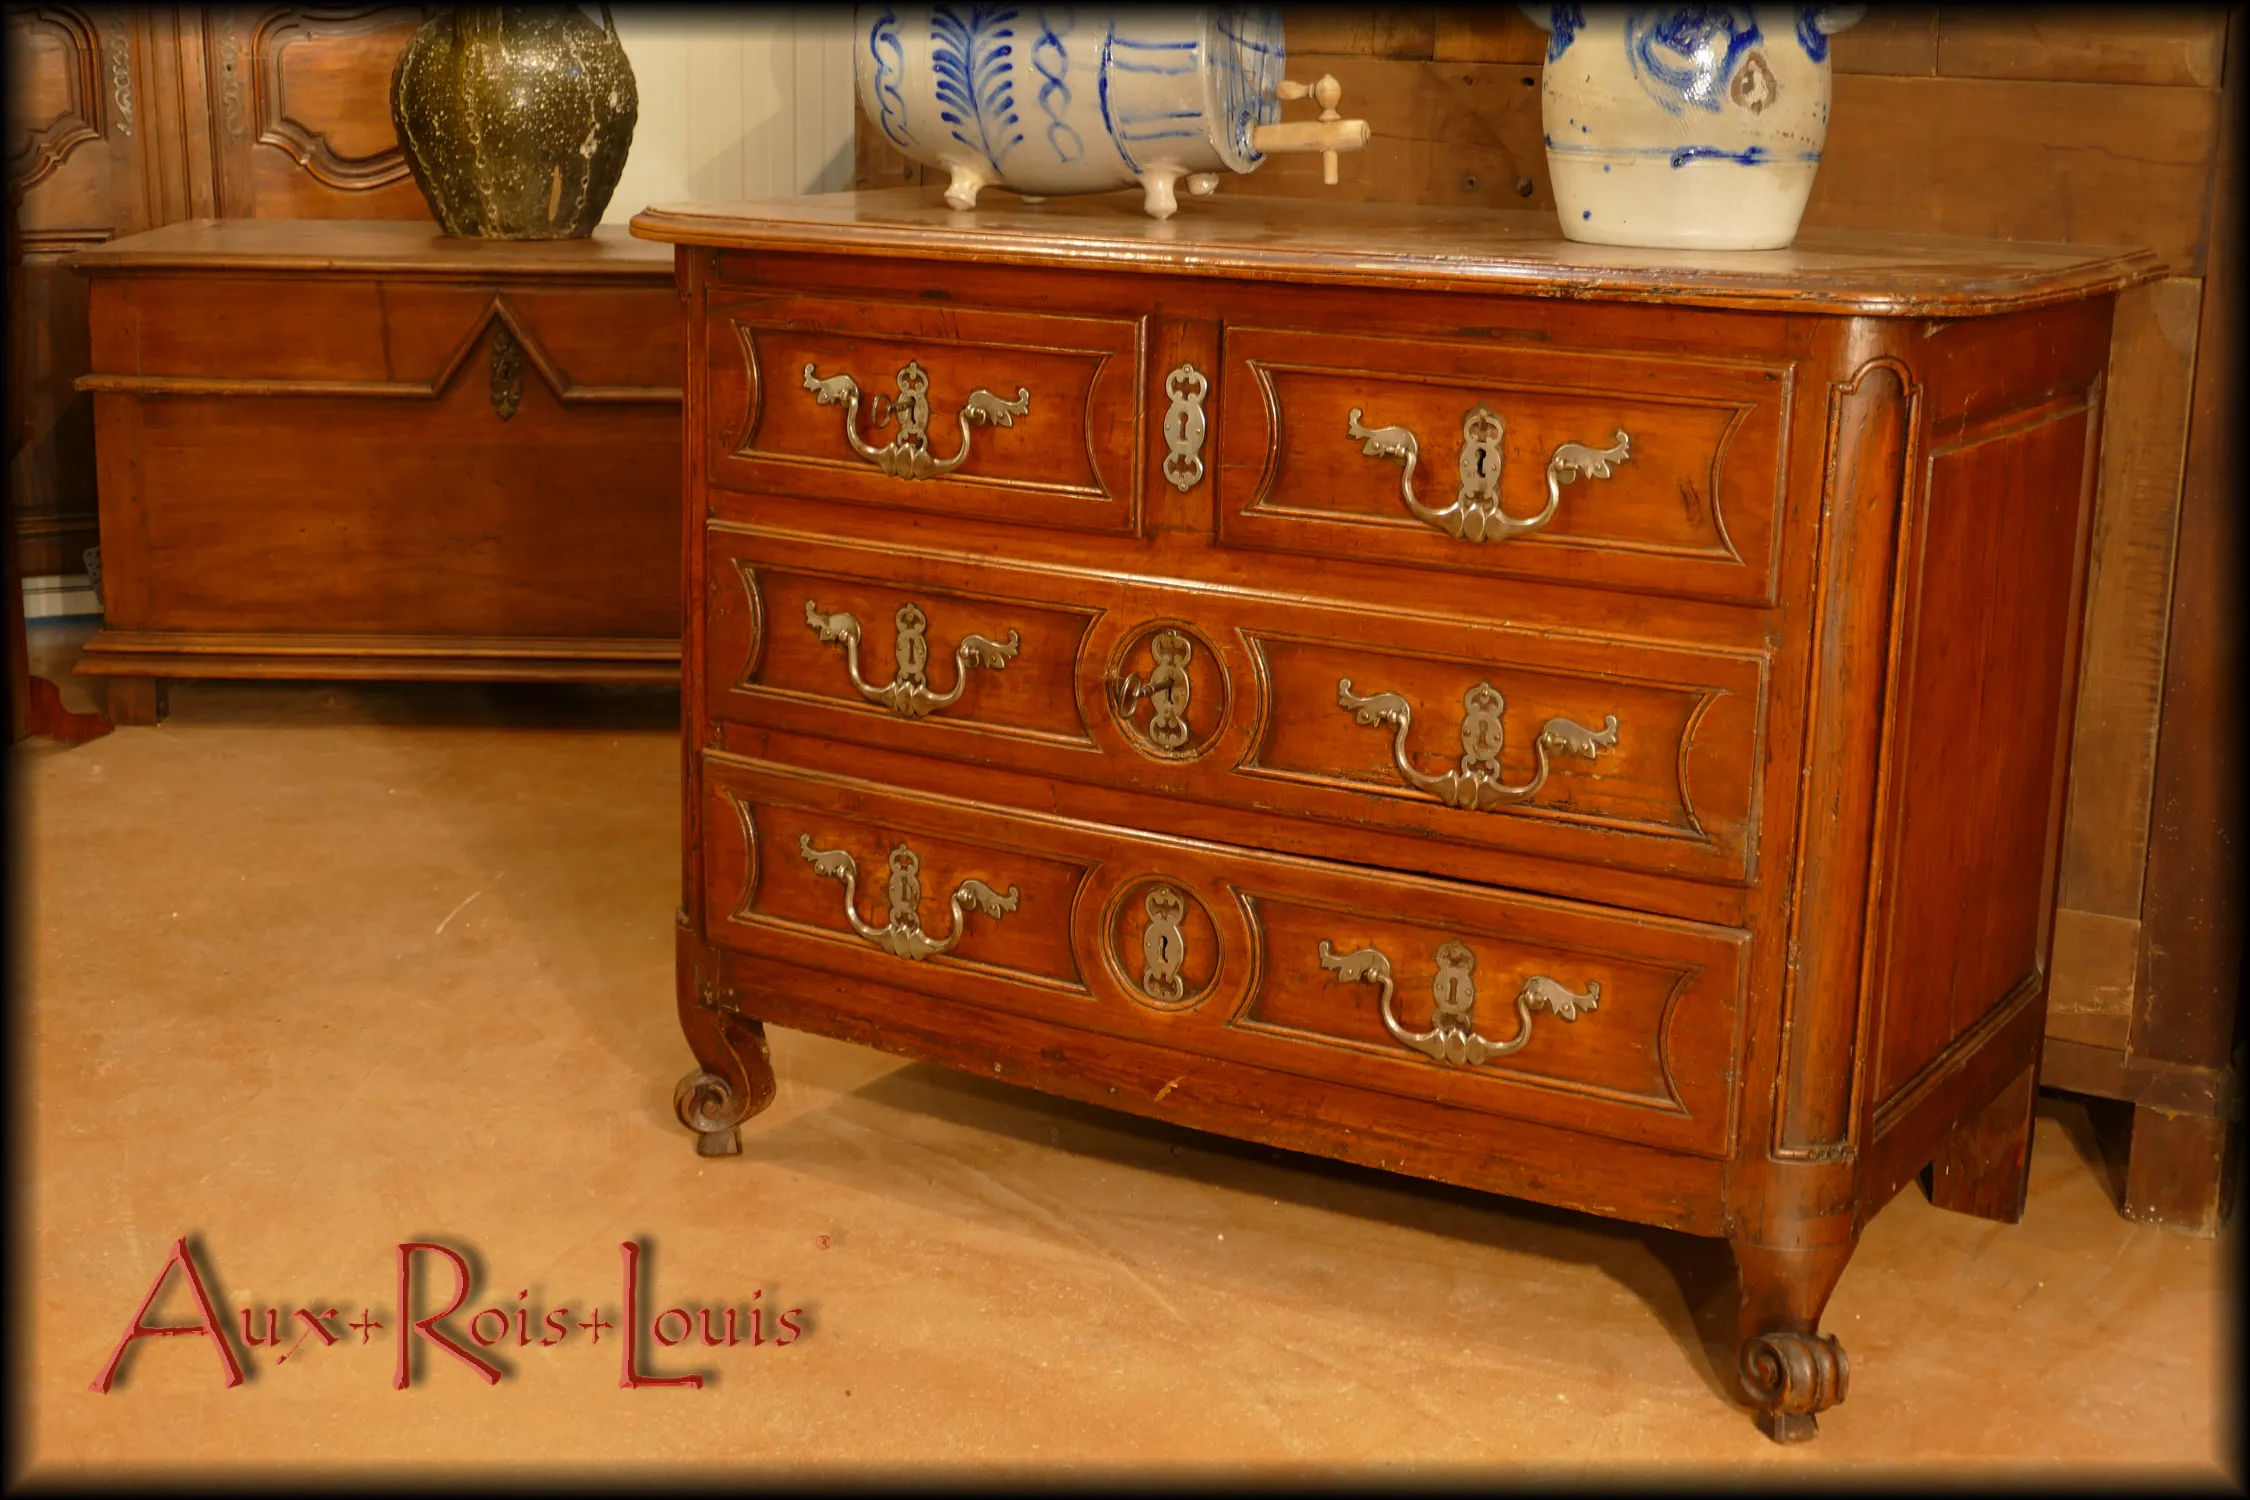 Chest of drawers in cherry wood with four drawers on its curved front, two large at the bottom and two smaller at the top placed side by side. It was made in Périgord in the 18th century in thick cherry boards and rests on two scrolled legs at the front and two straight legs at the back.